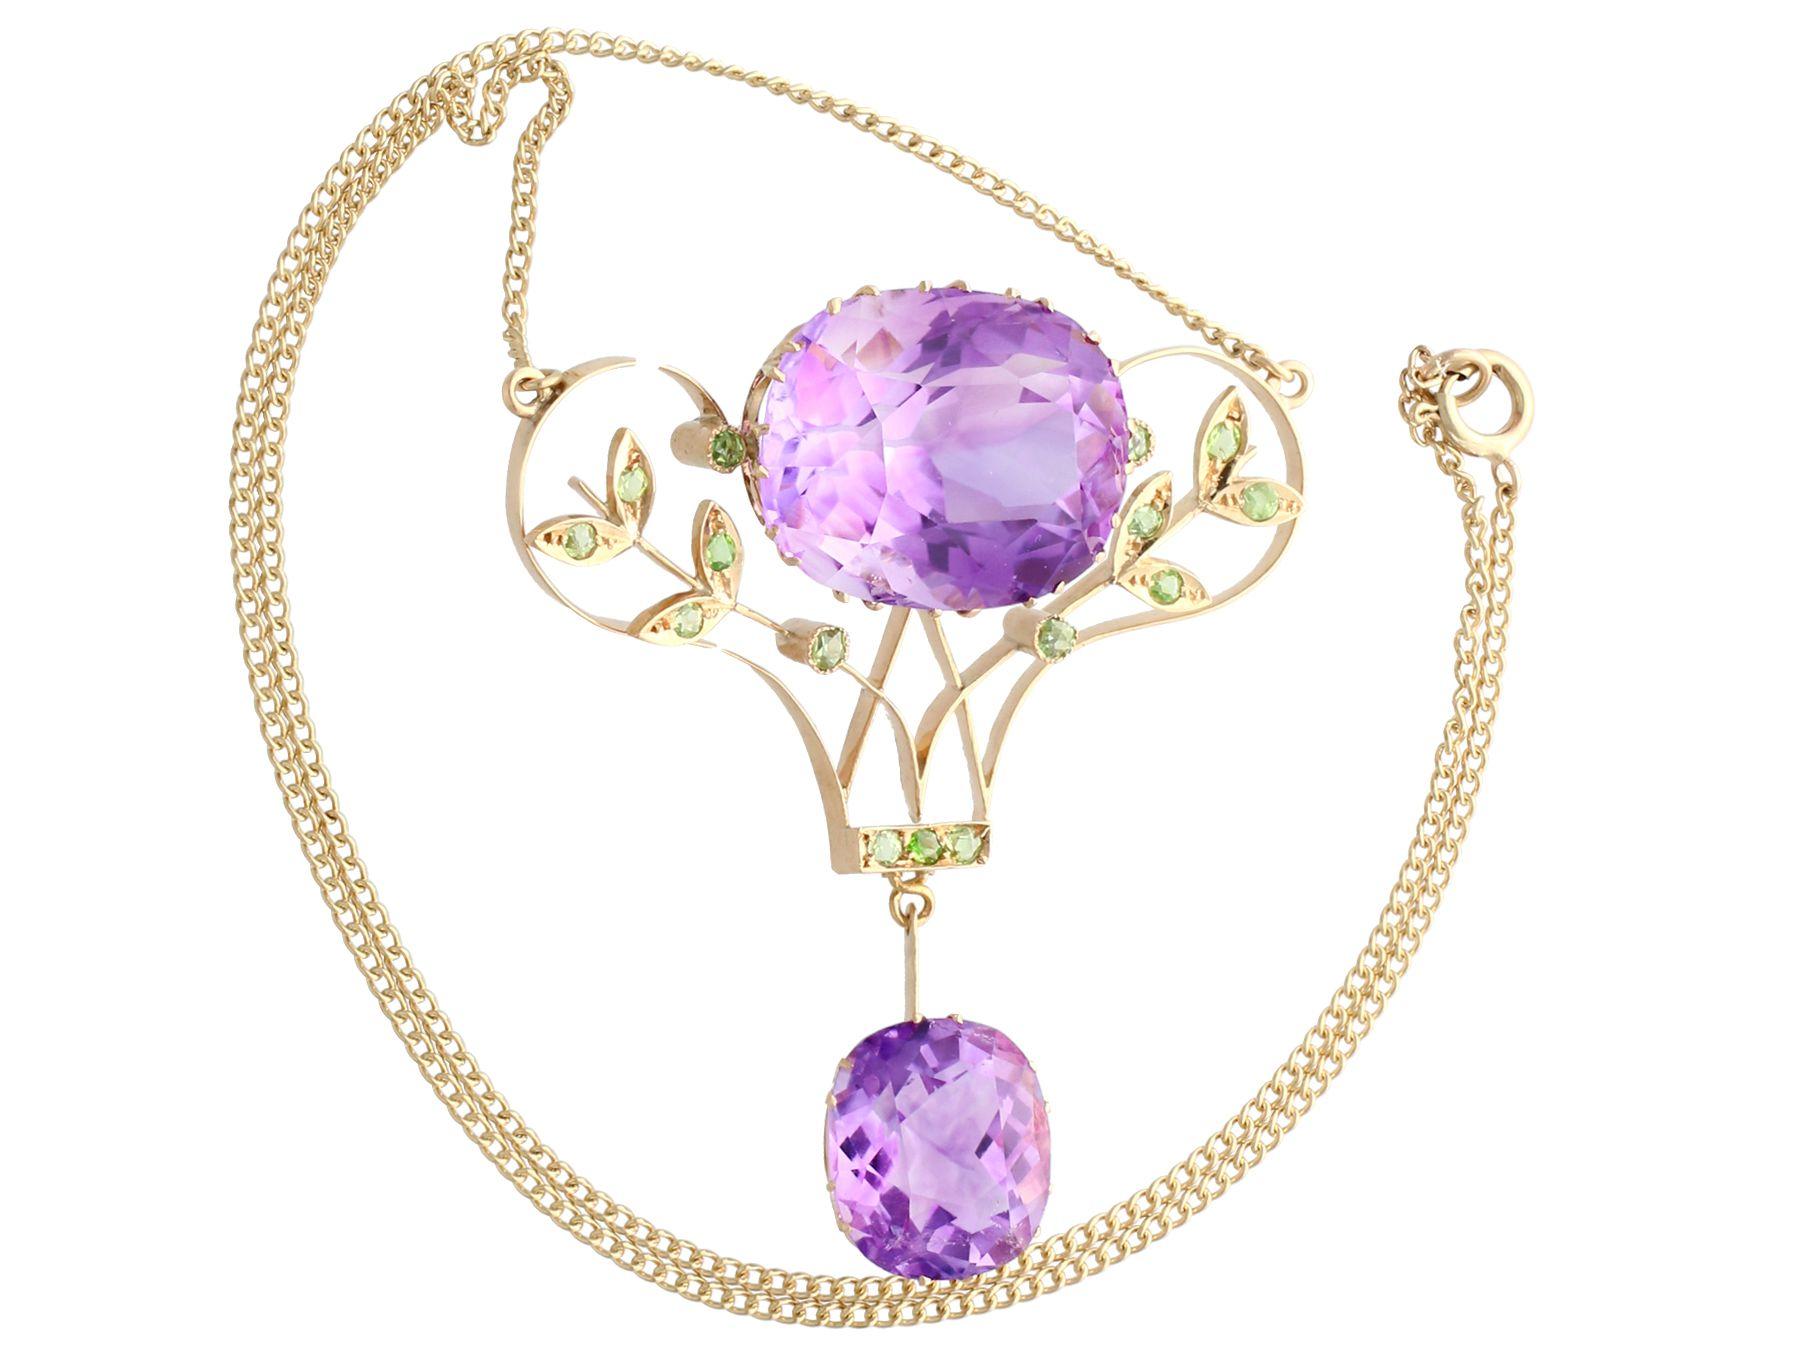 A stunning, fine and impressive antique 40.68 Ct amethyst and 1.26 Ct demantoid garnet, 14k yellow gold pendant; part of our diverse gemstone jewelry collections.

This stunning Russian antique pendant has been crafted in 14k yellow gold.

The